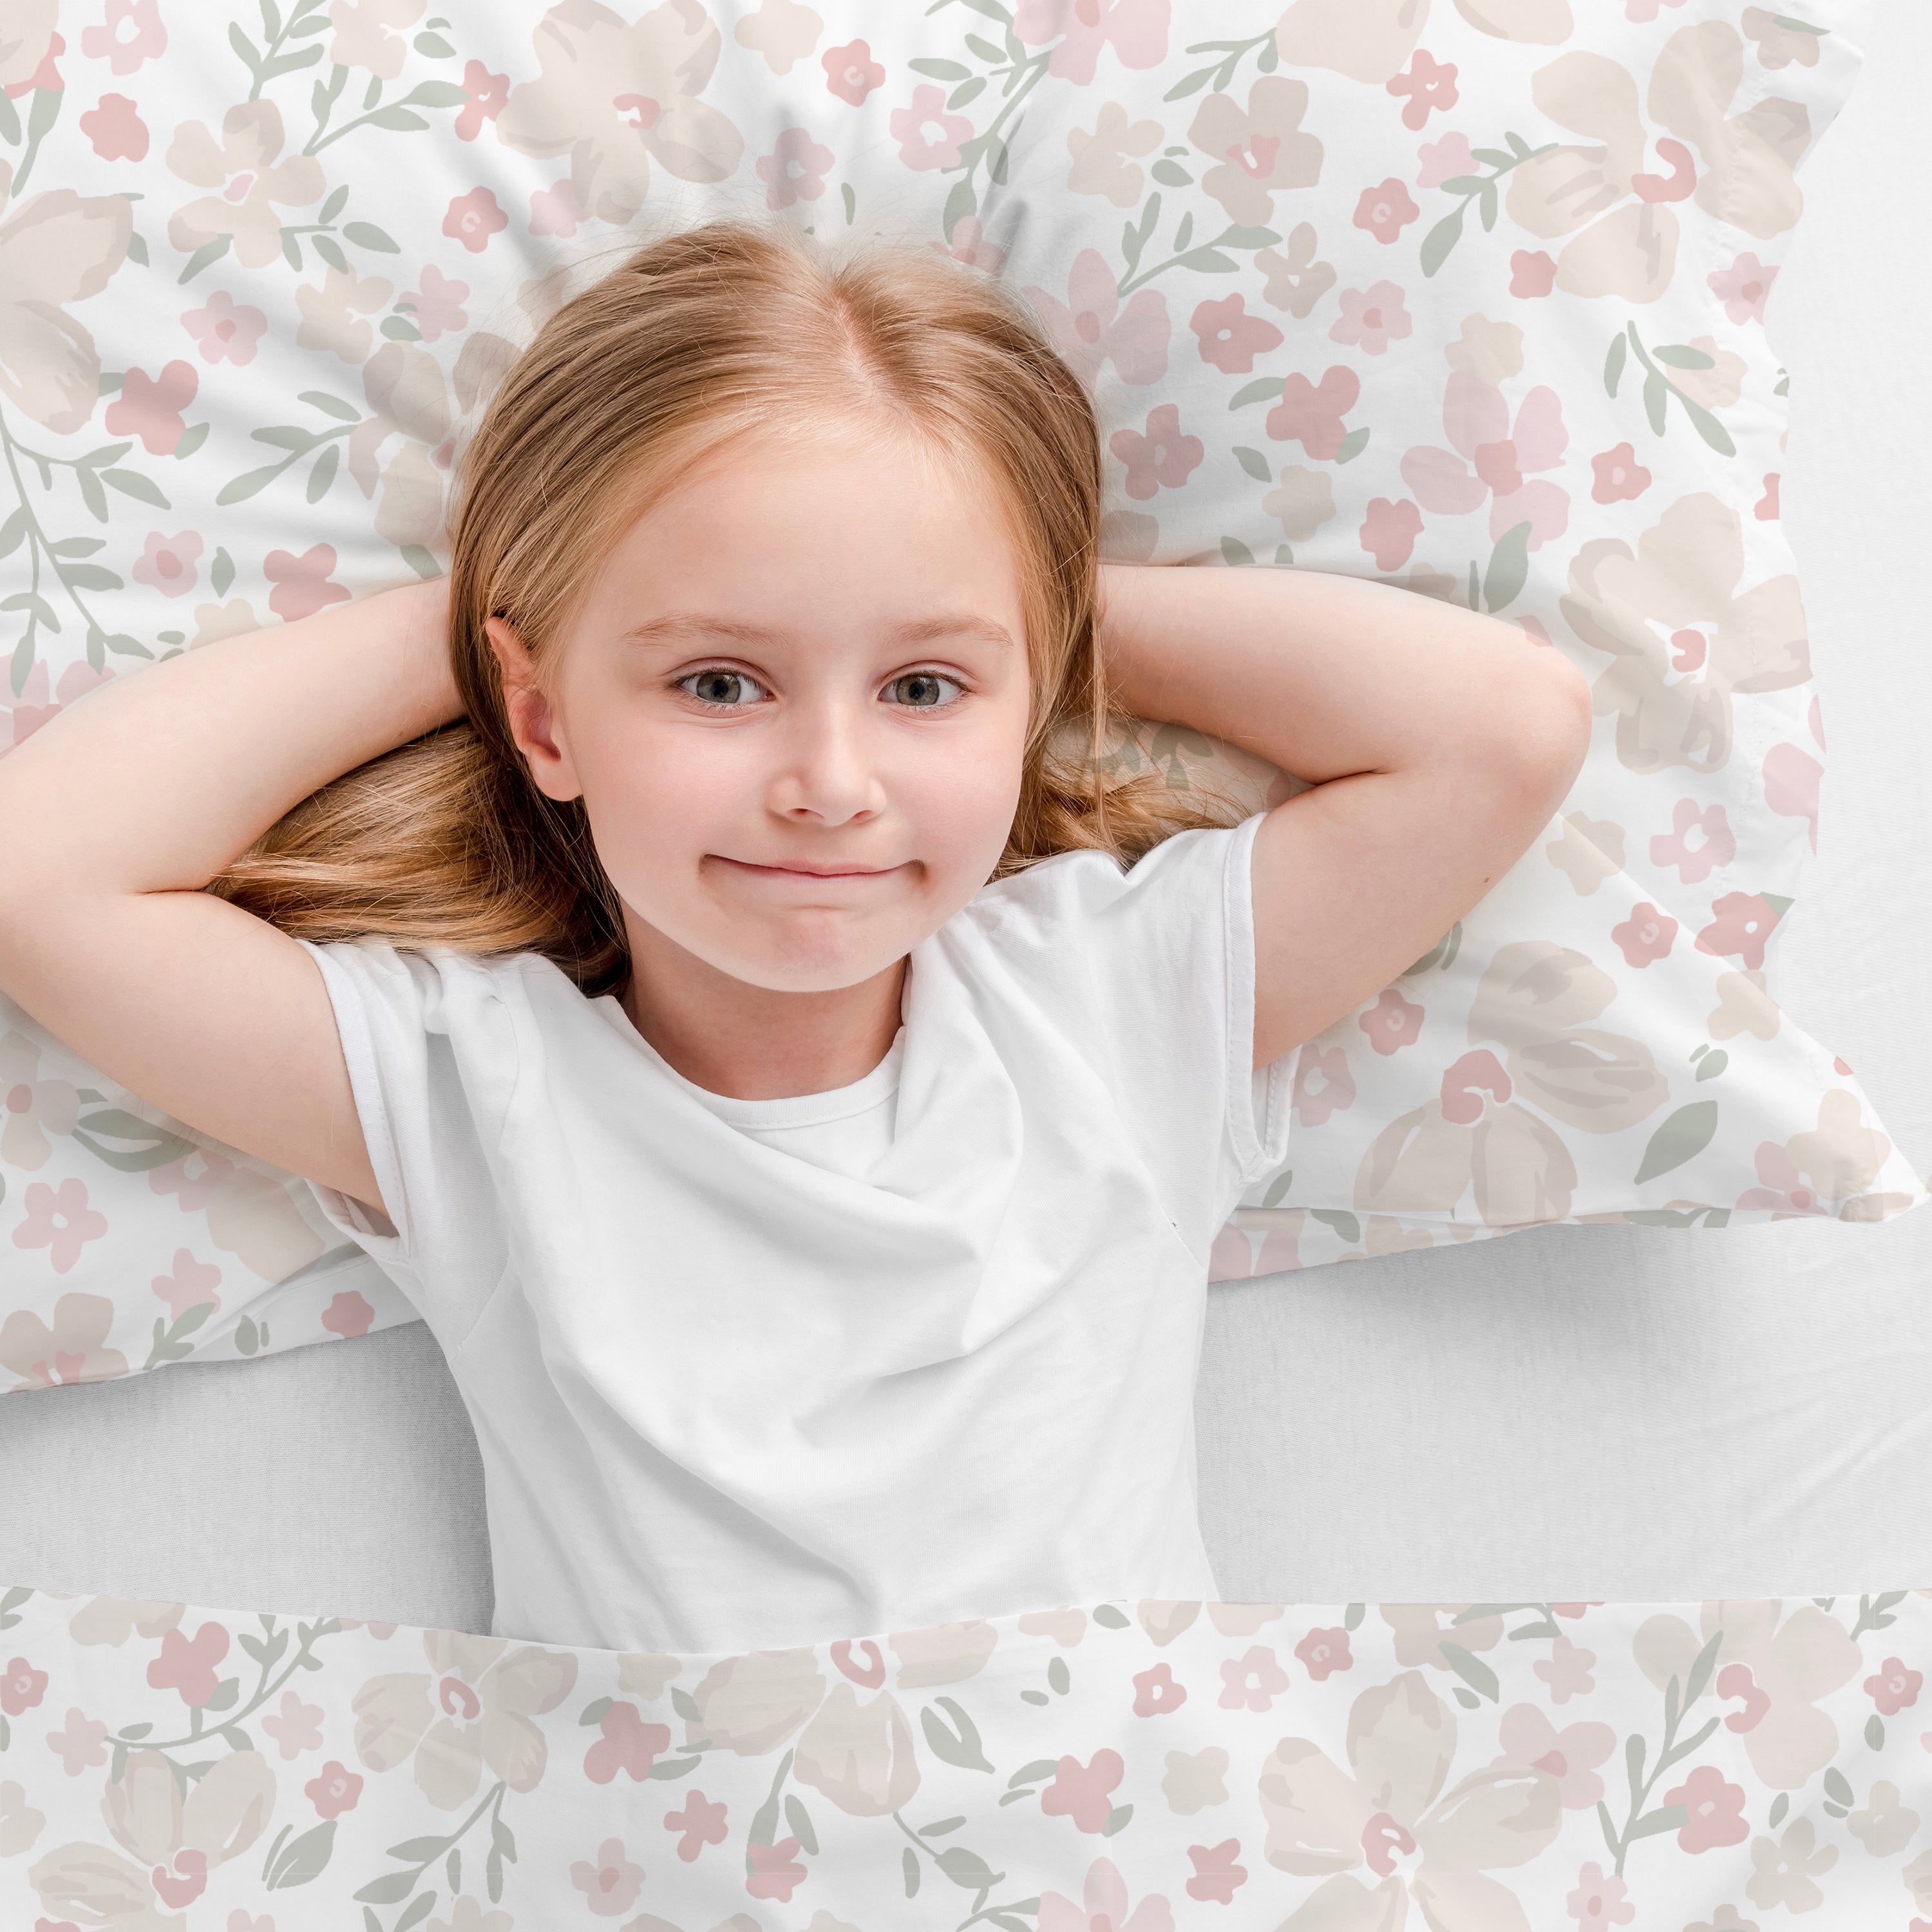 A young girl with light hair and a gentle smile, lying on her back on a bed with Makemake Organics Organic Cotton Toddler Pillowcase in Blossom print bedding, hands resting behind her head, looking up at the camera.